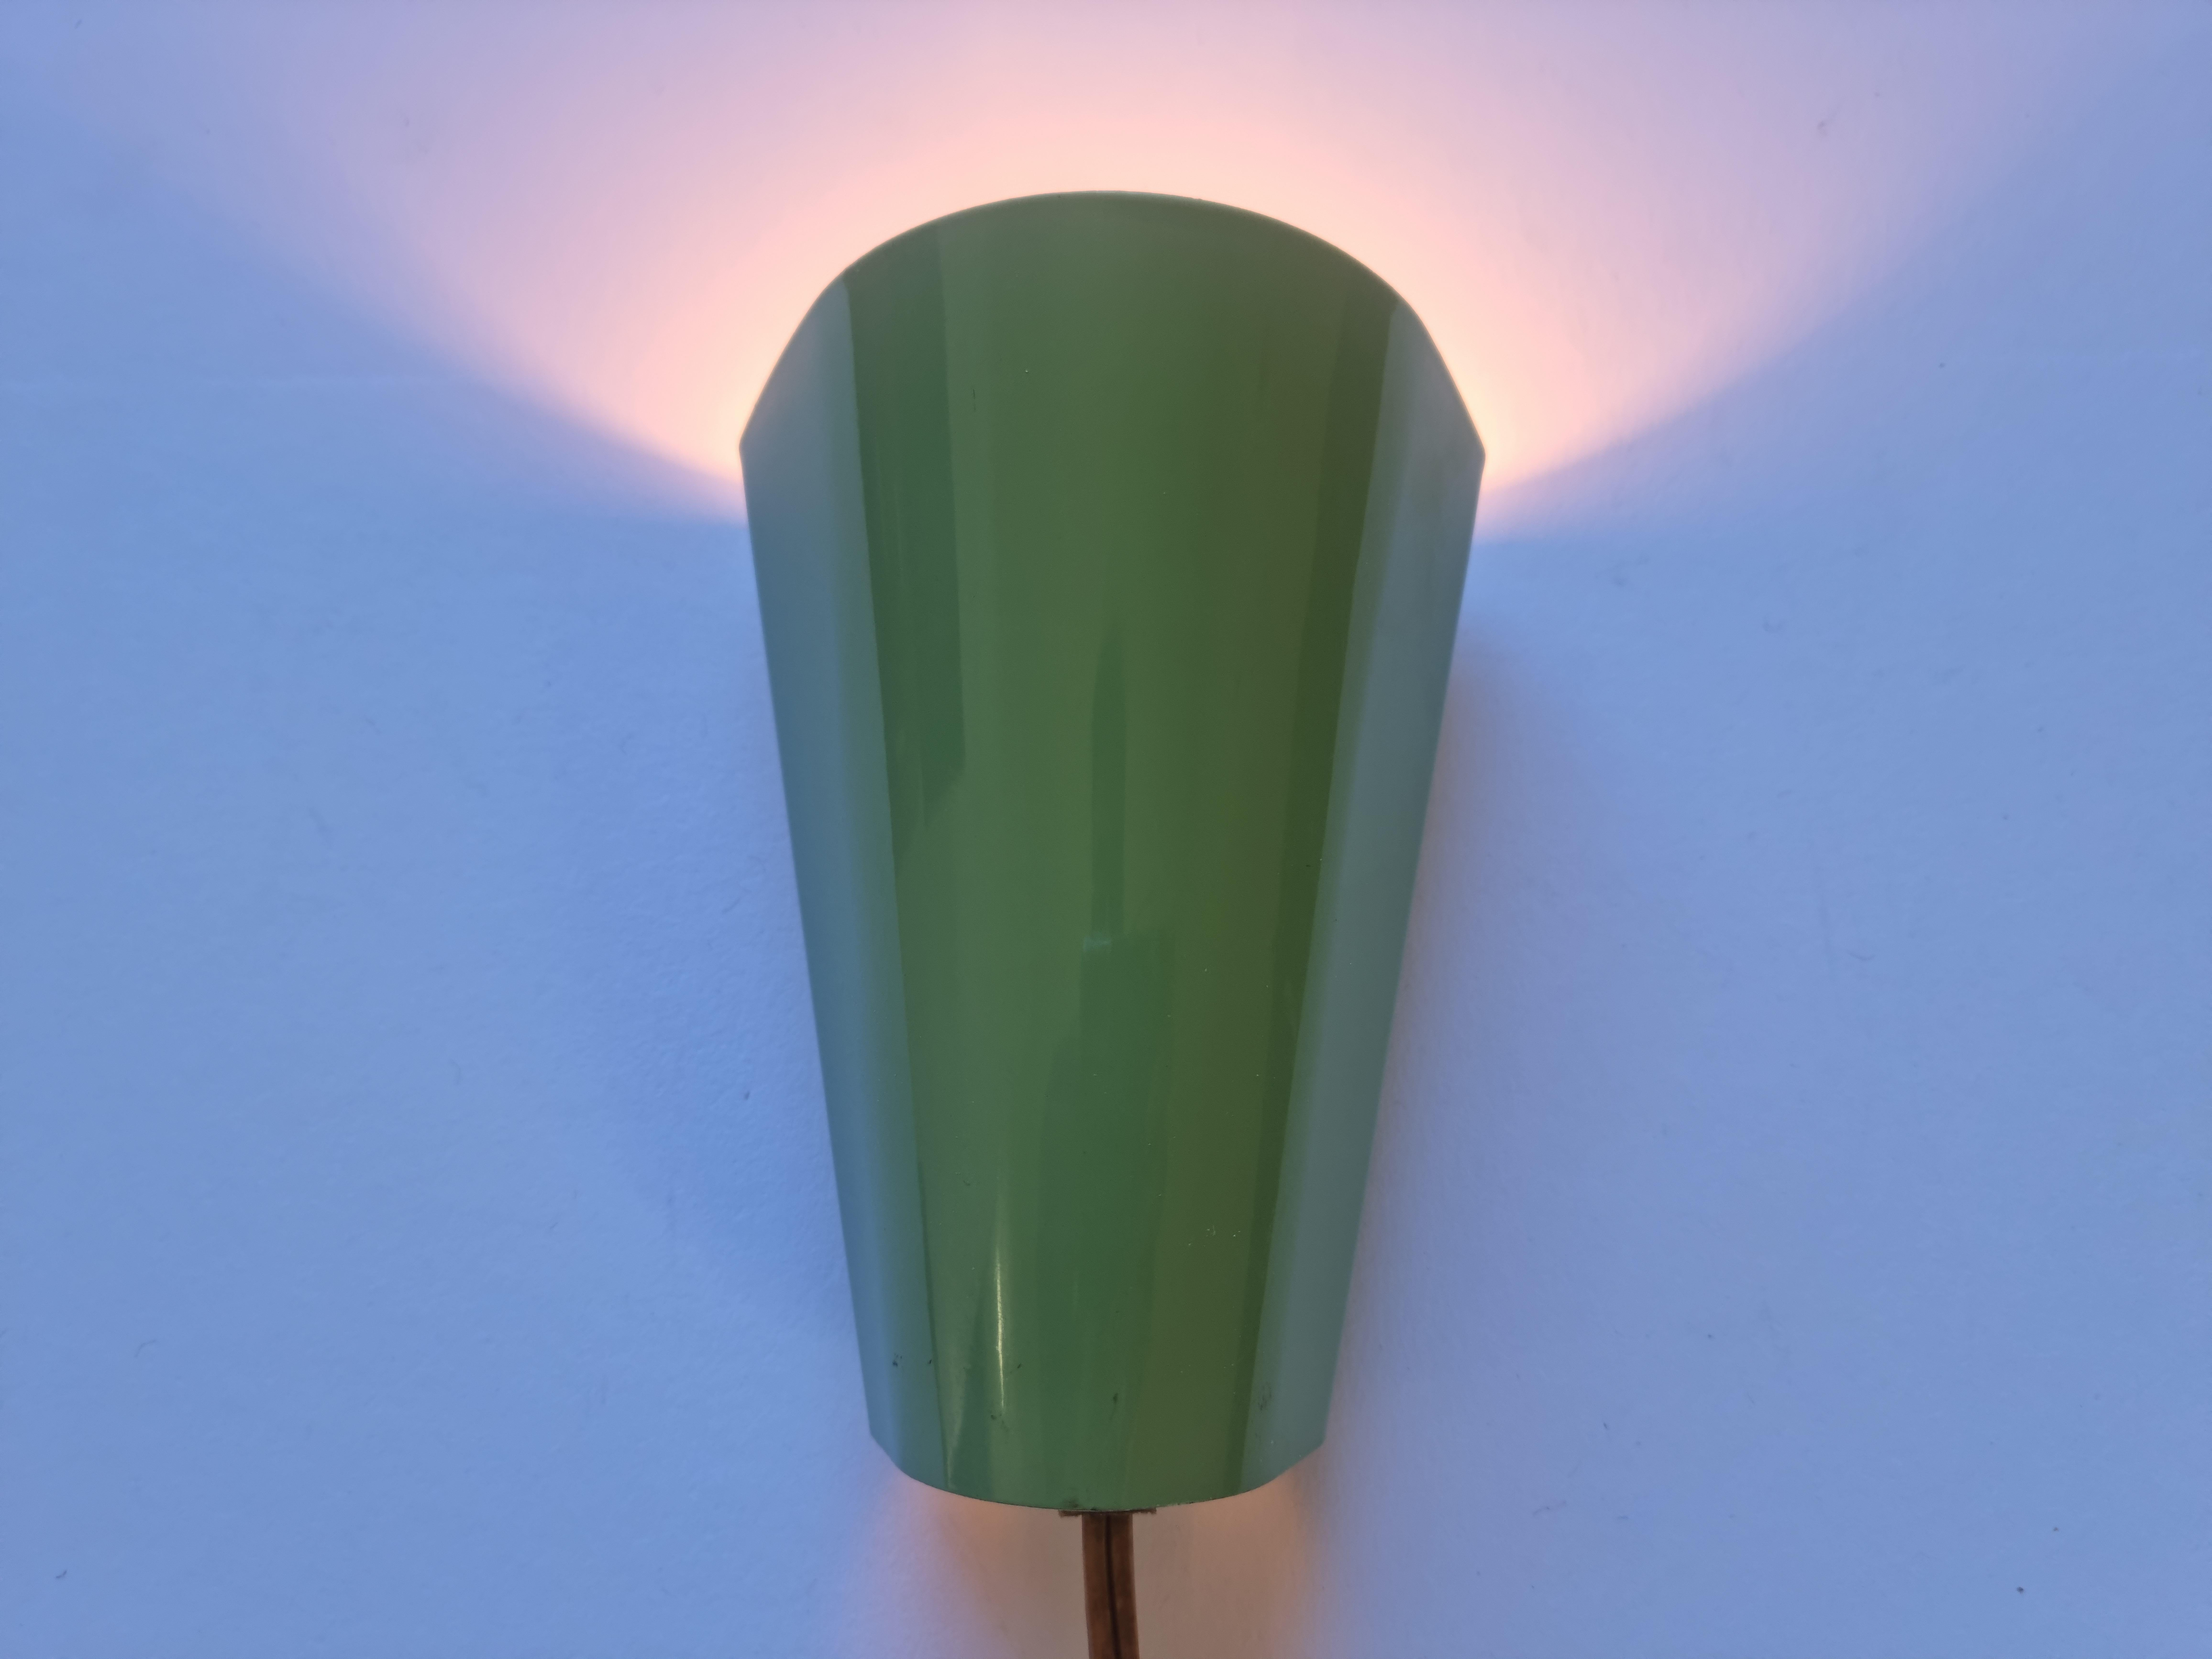 Midcentury Rare Wall Lamp Lidokov, Designed by Josef Hurka, 1960s For Sale 3